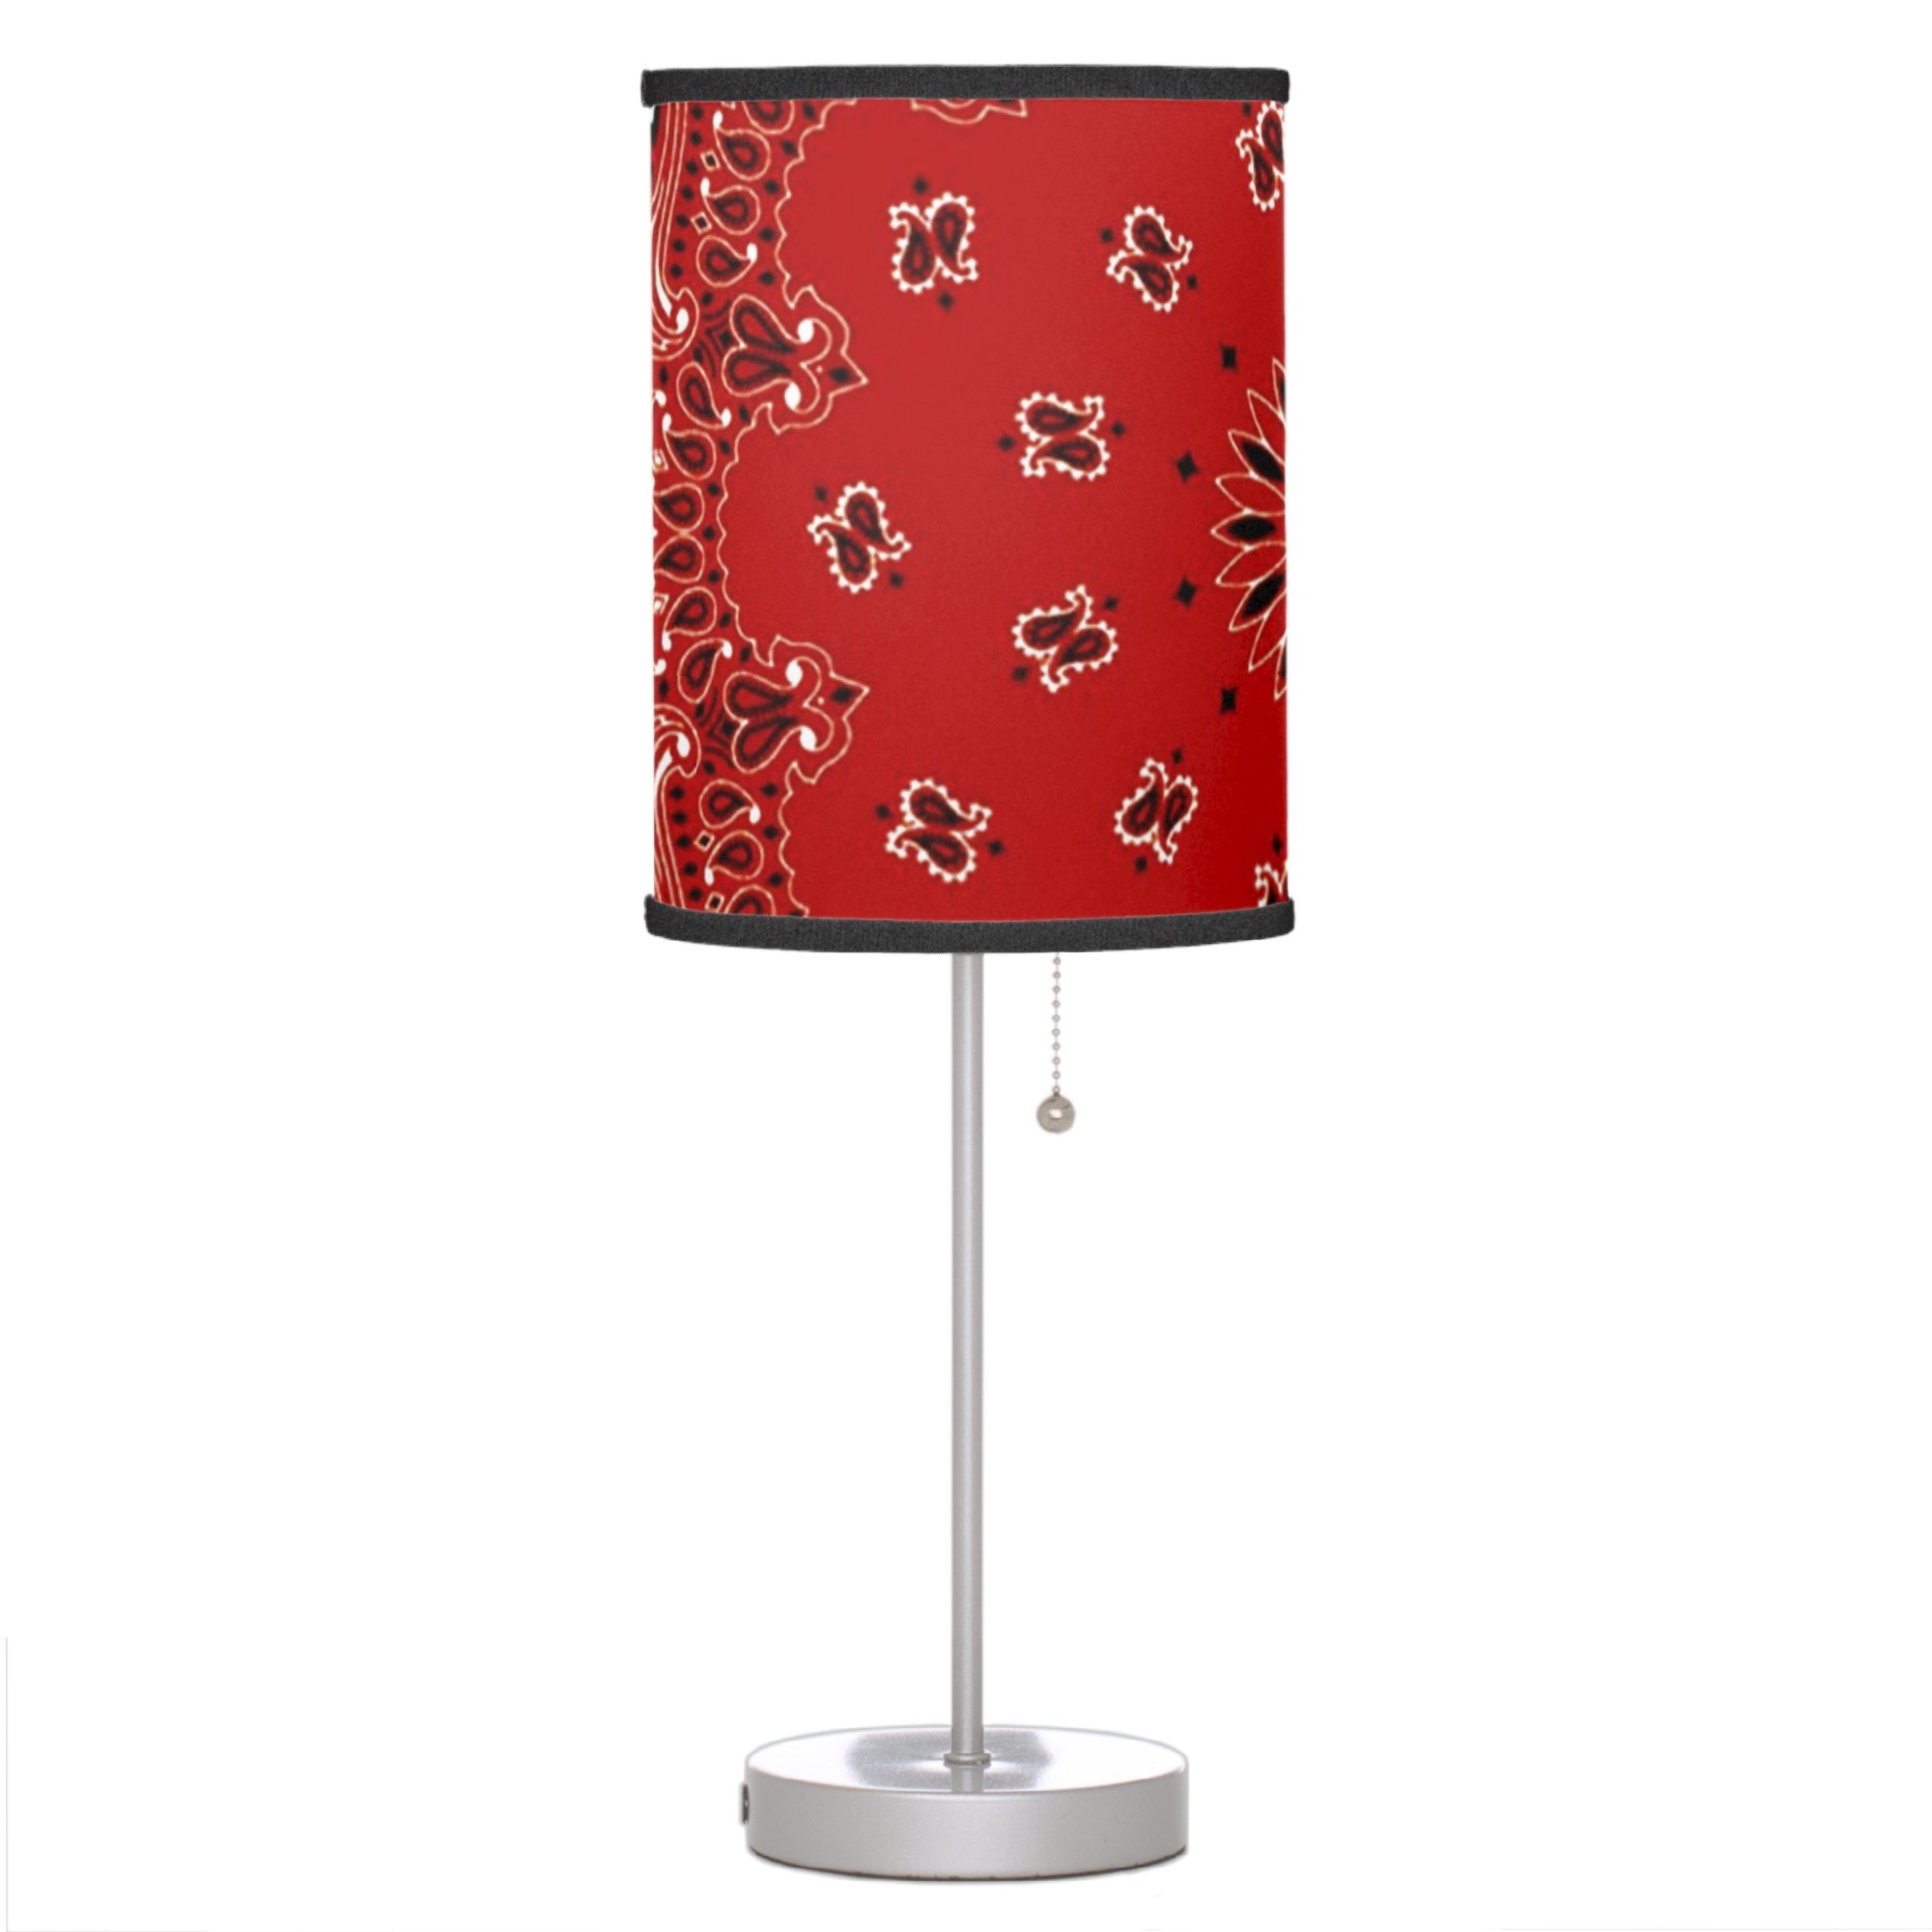 This image released by Zazzle shows a lamp with a shade that features a bandana paisley motif. (Zazzle via AP)